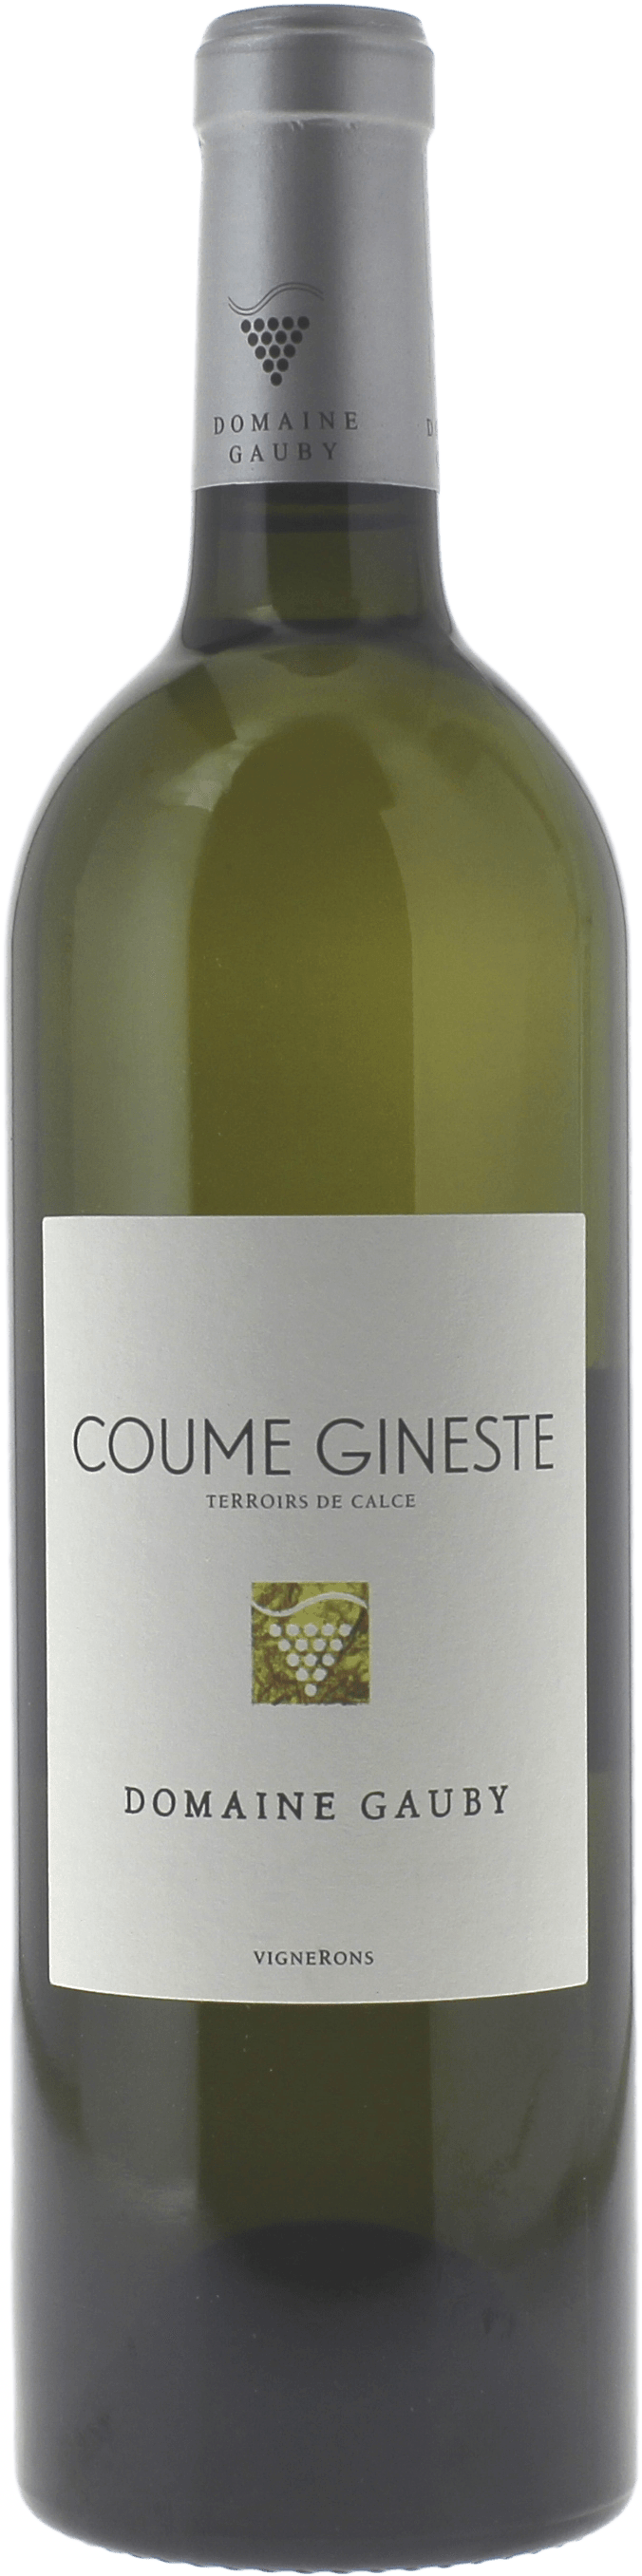 Gauby coume gineste blanc 2021  IGP Ctes catalanes, Roussillon